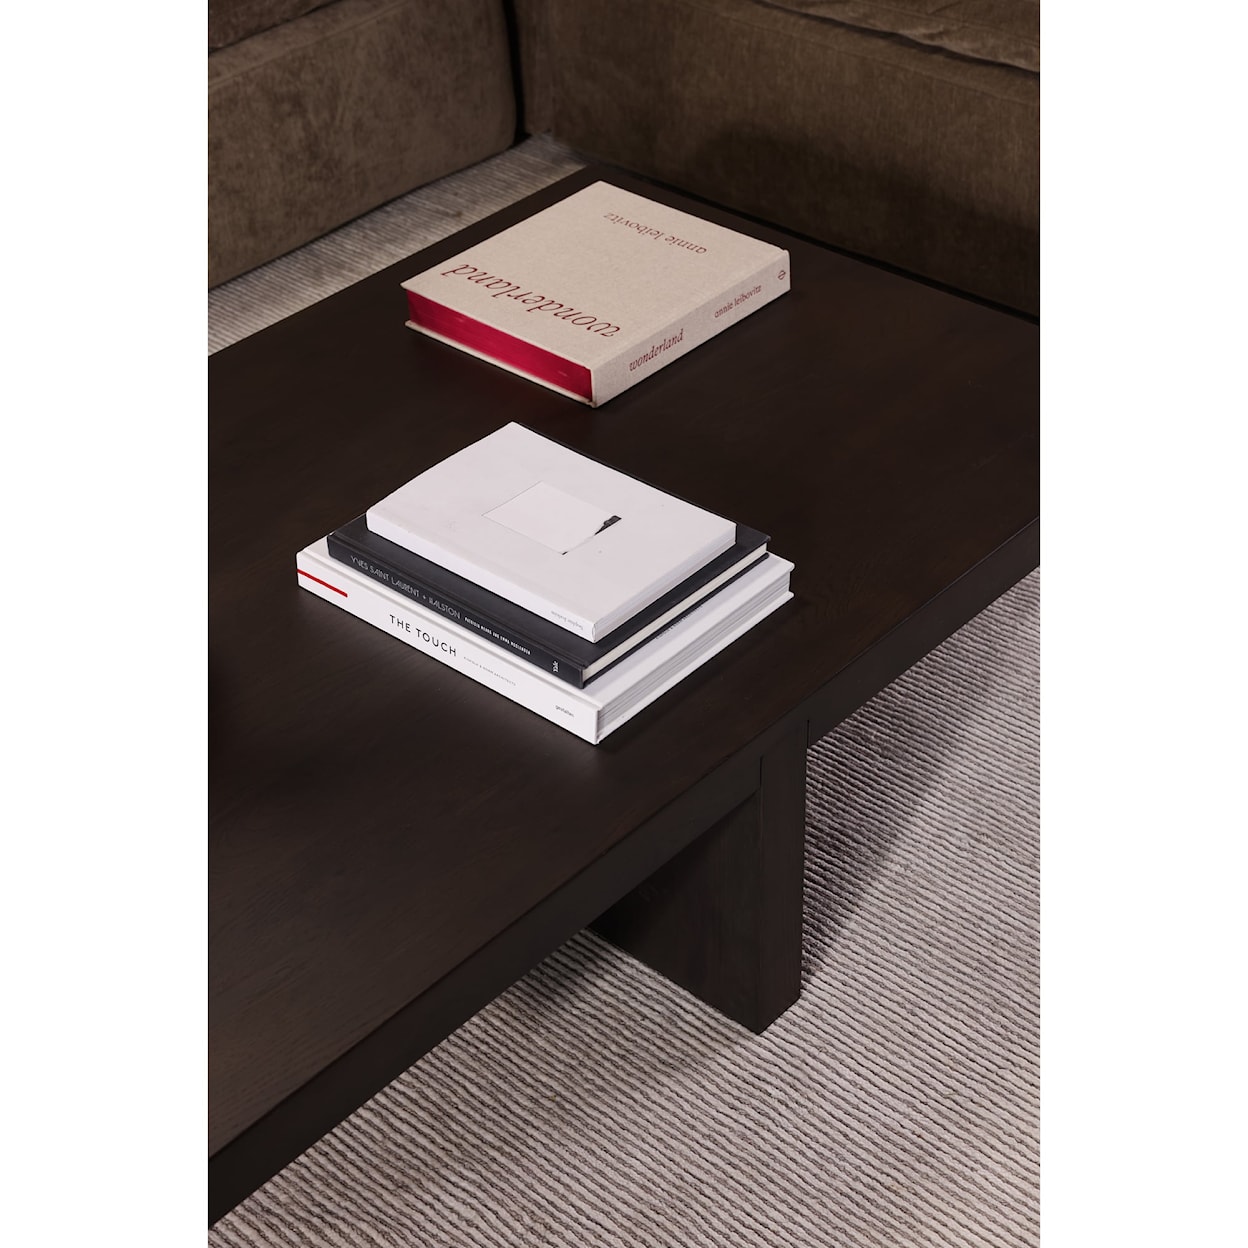 Moe's Home Collection Folke Coffee Table